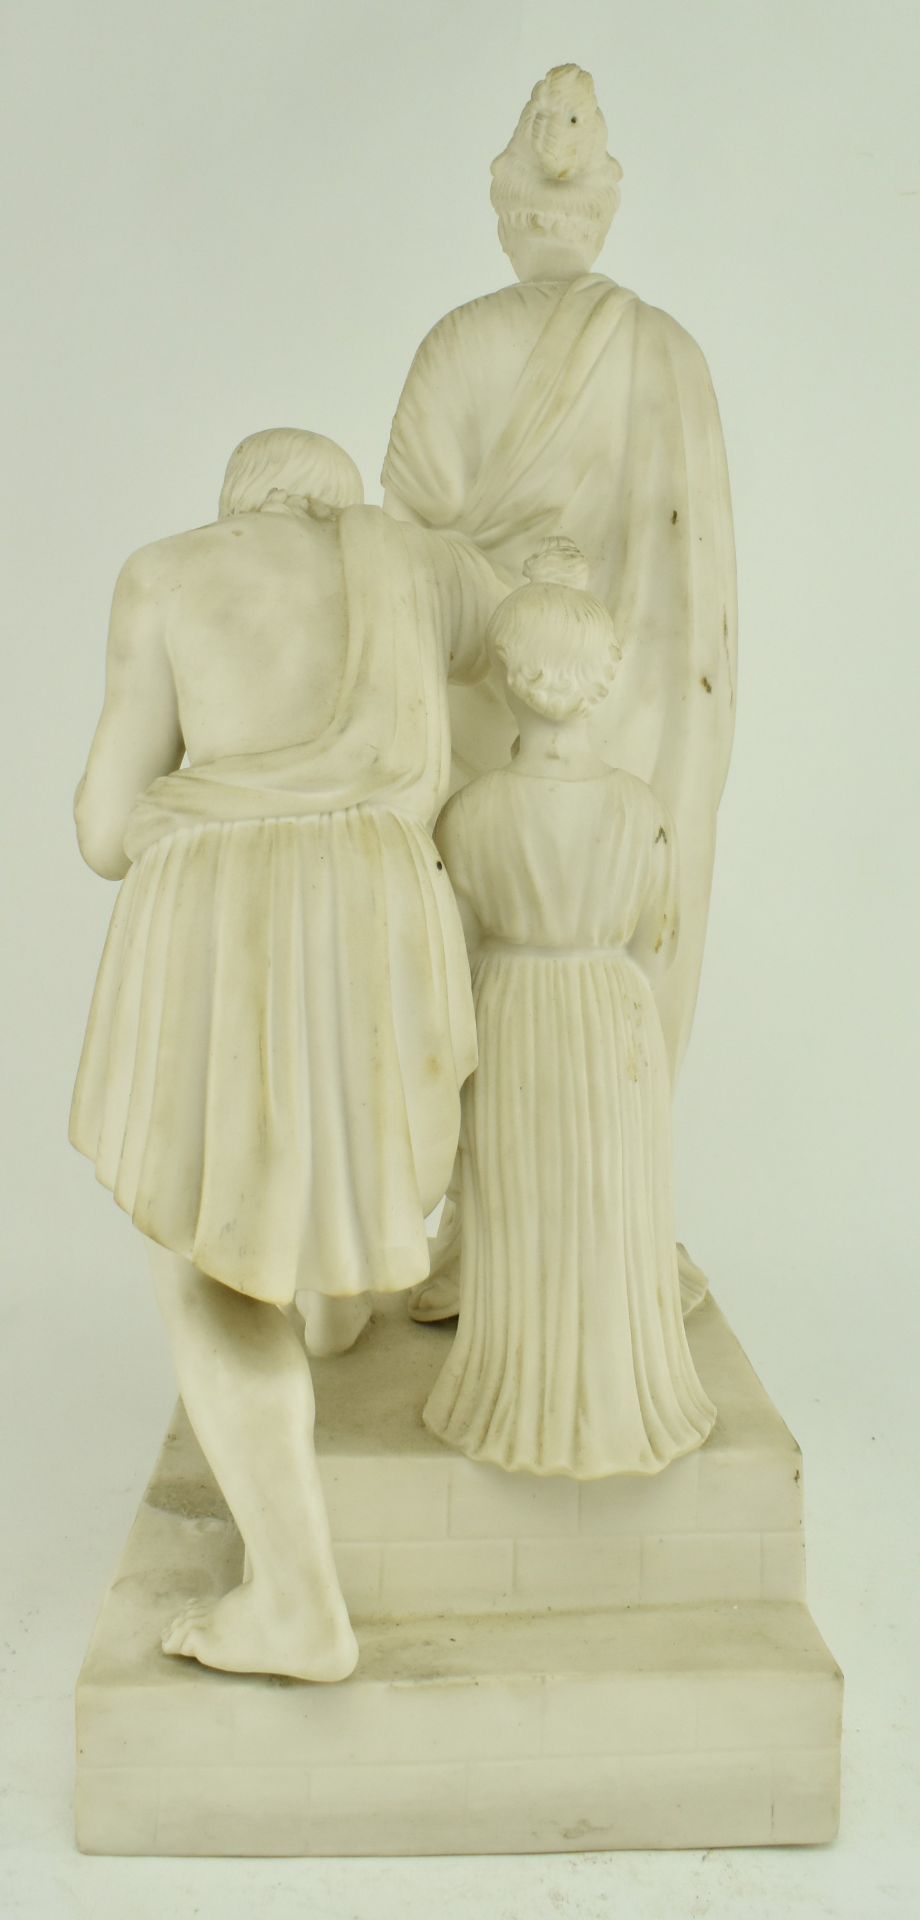 CONTINENTAL SEVRES MANNERS PARIAN WARE CHARITY FIGURE - Image 3 of 6